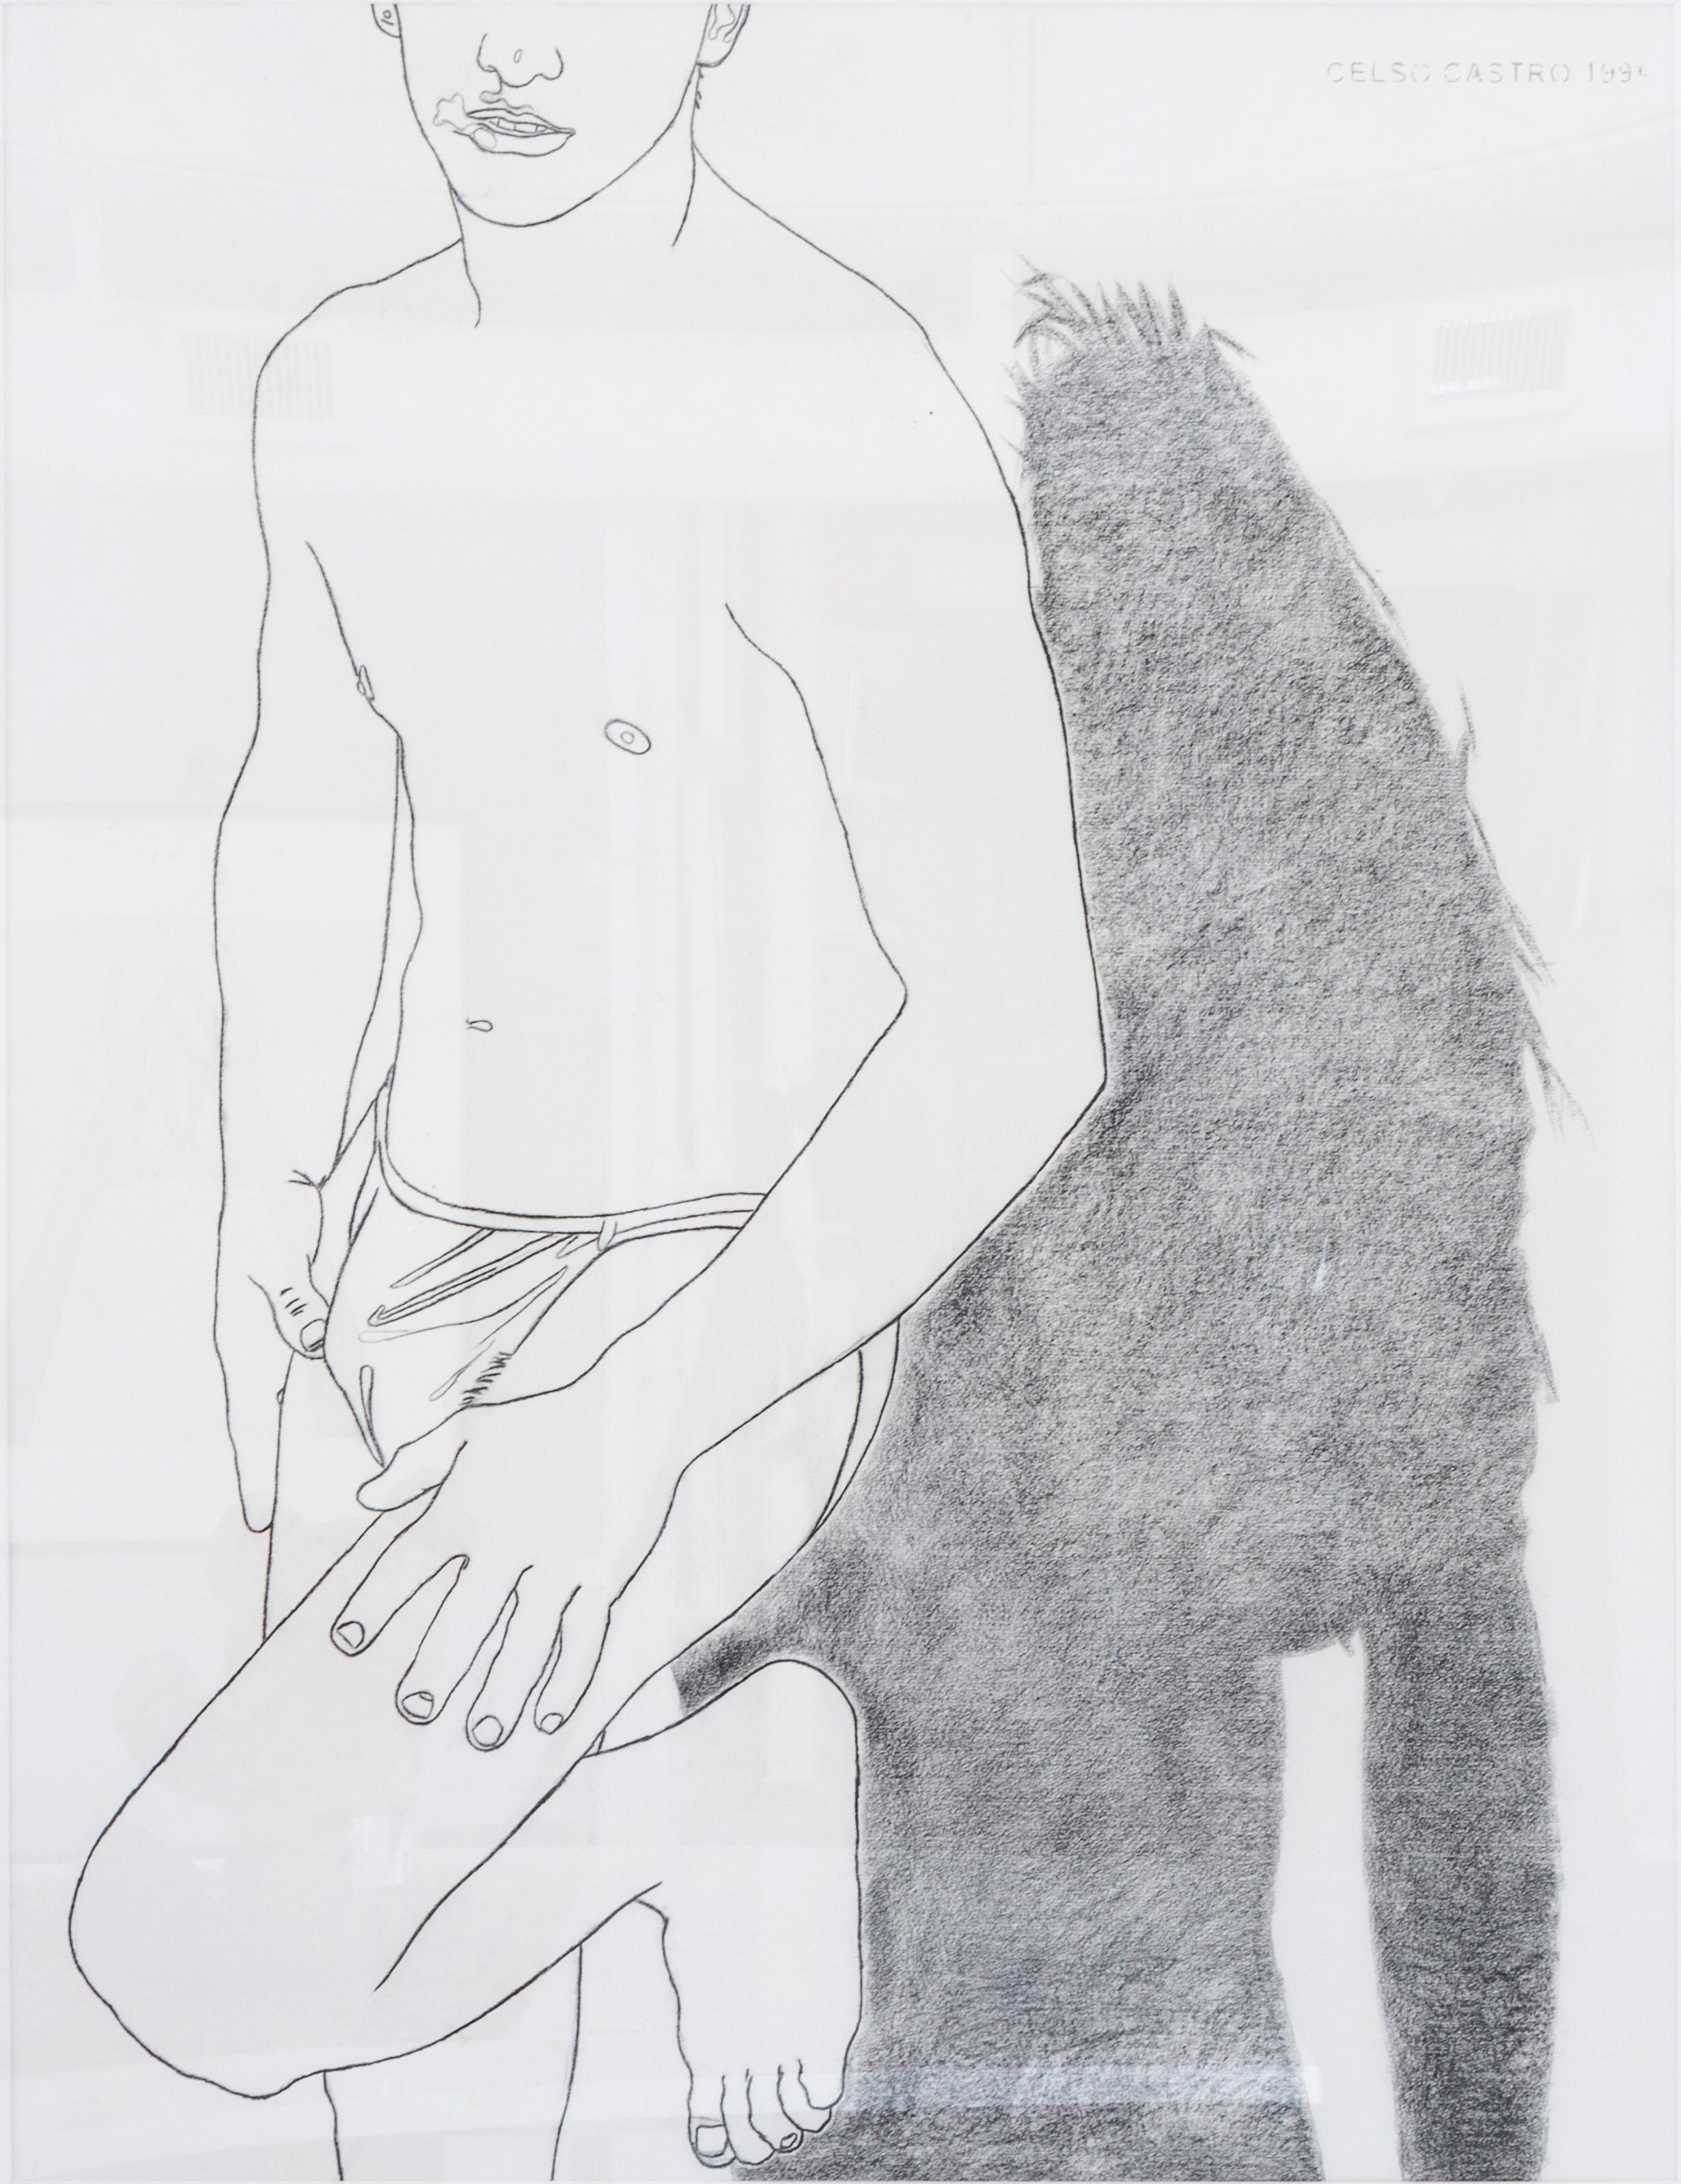 Untitled- Portrait, 1997 by Celso Castro-Daza
Pencil or archival paper
Image size: 48 H in. x 36.5 in. W 
Framed: 58 H x 41 in. W 2 in. D

Drawing on paper is his basic work tool,  some are sketches of his surviving works, and others are sketches of